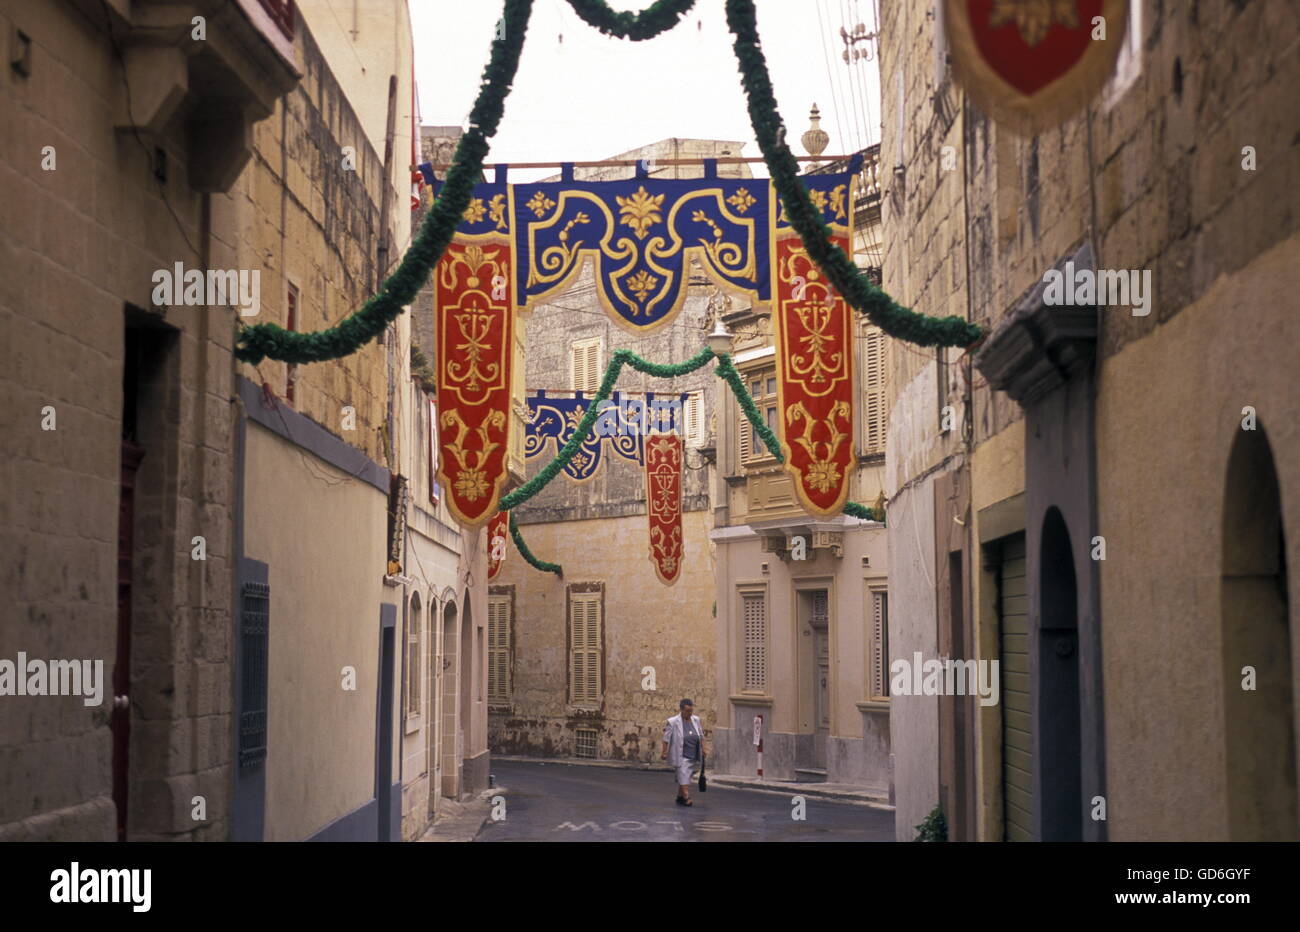 The traditional prozession of St Philip at the Church St Philip in the Village of Zebbug on Malta in Europe. Stock Photo